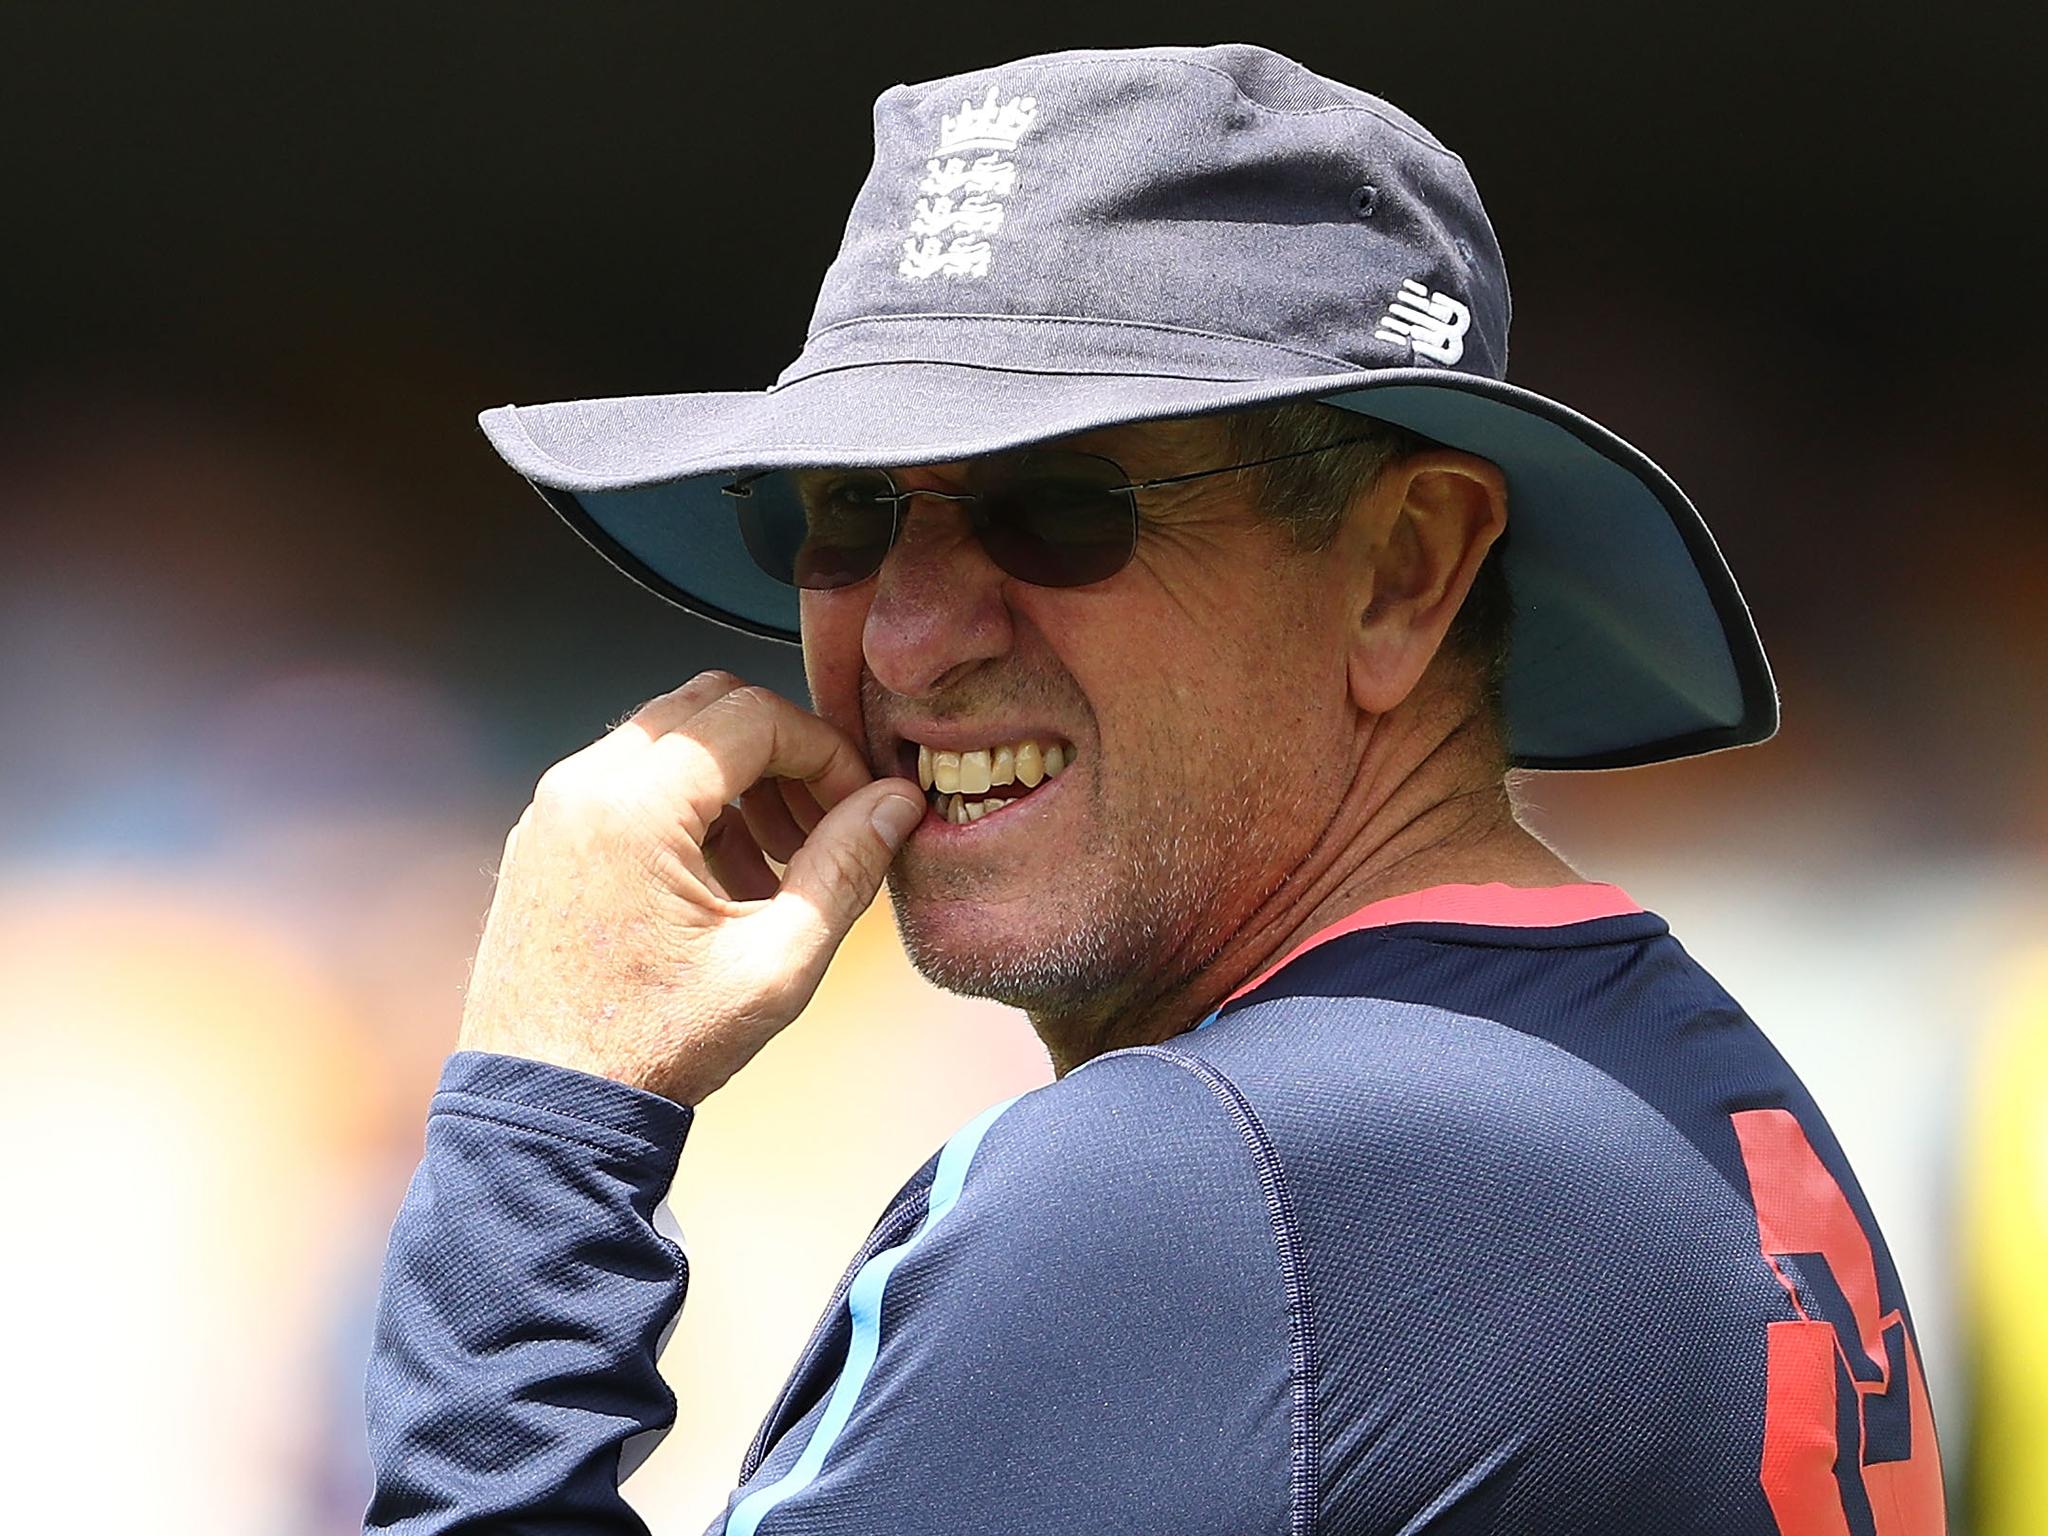 Trevor Bayliss hit out at the decision-making from his England side in the First Test defeat